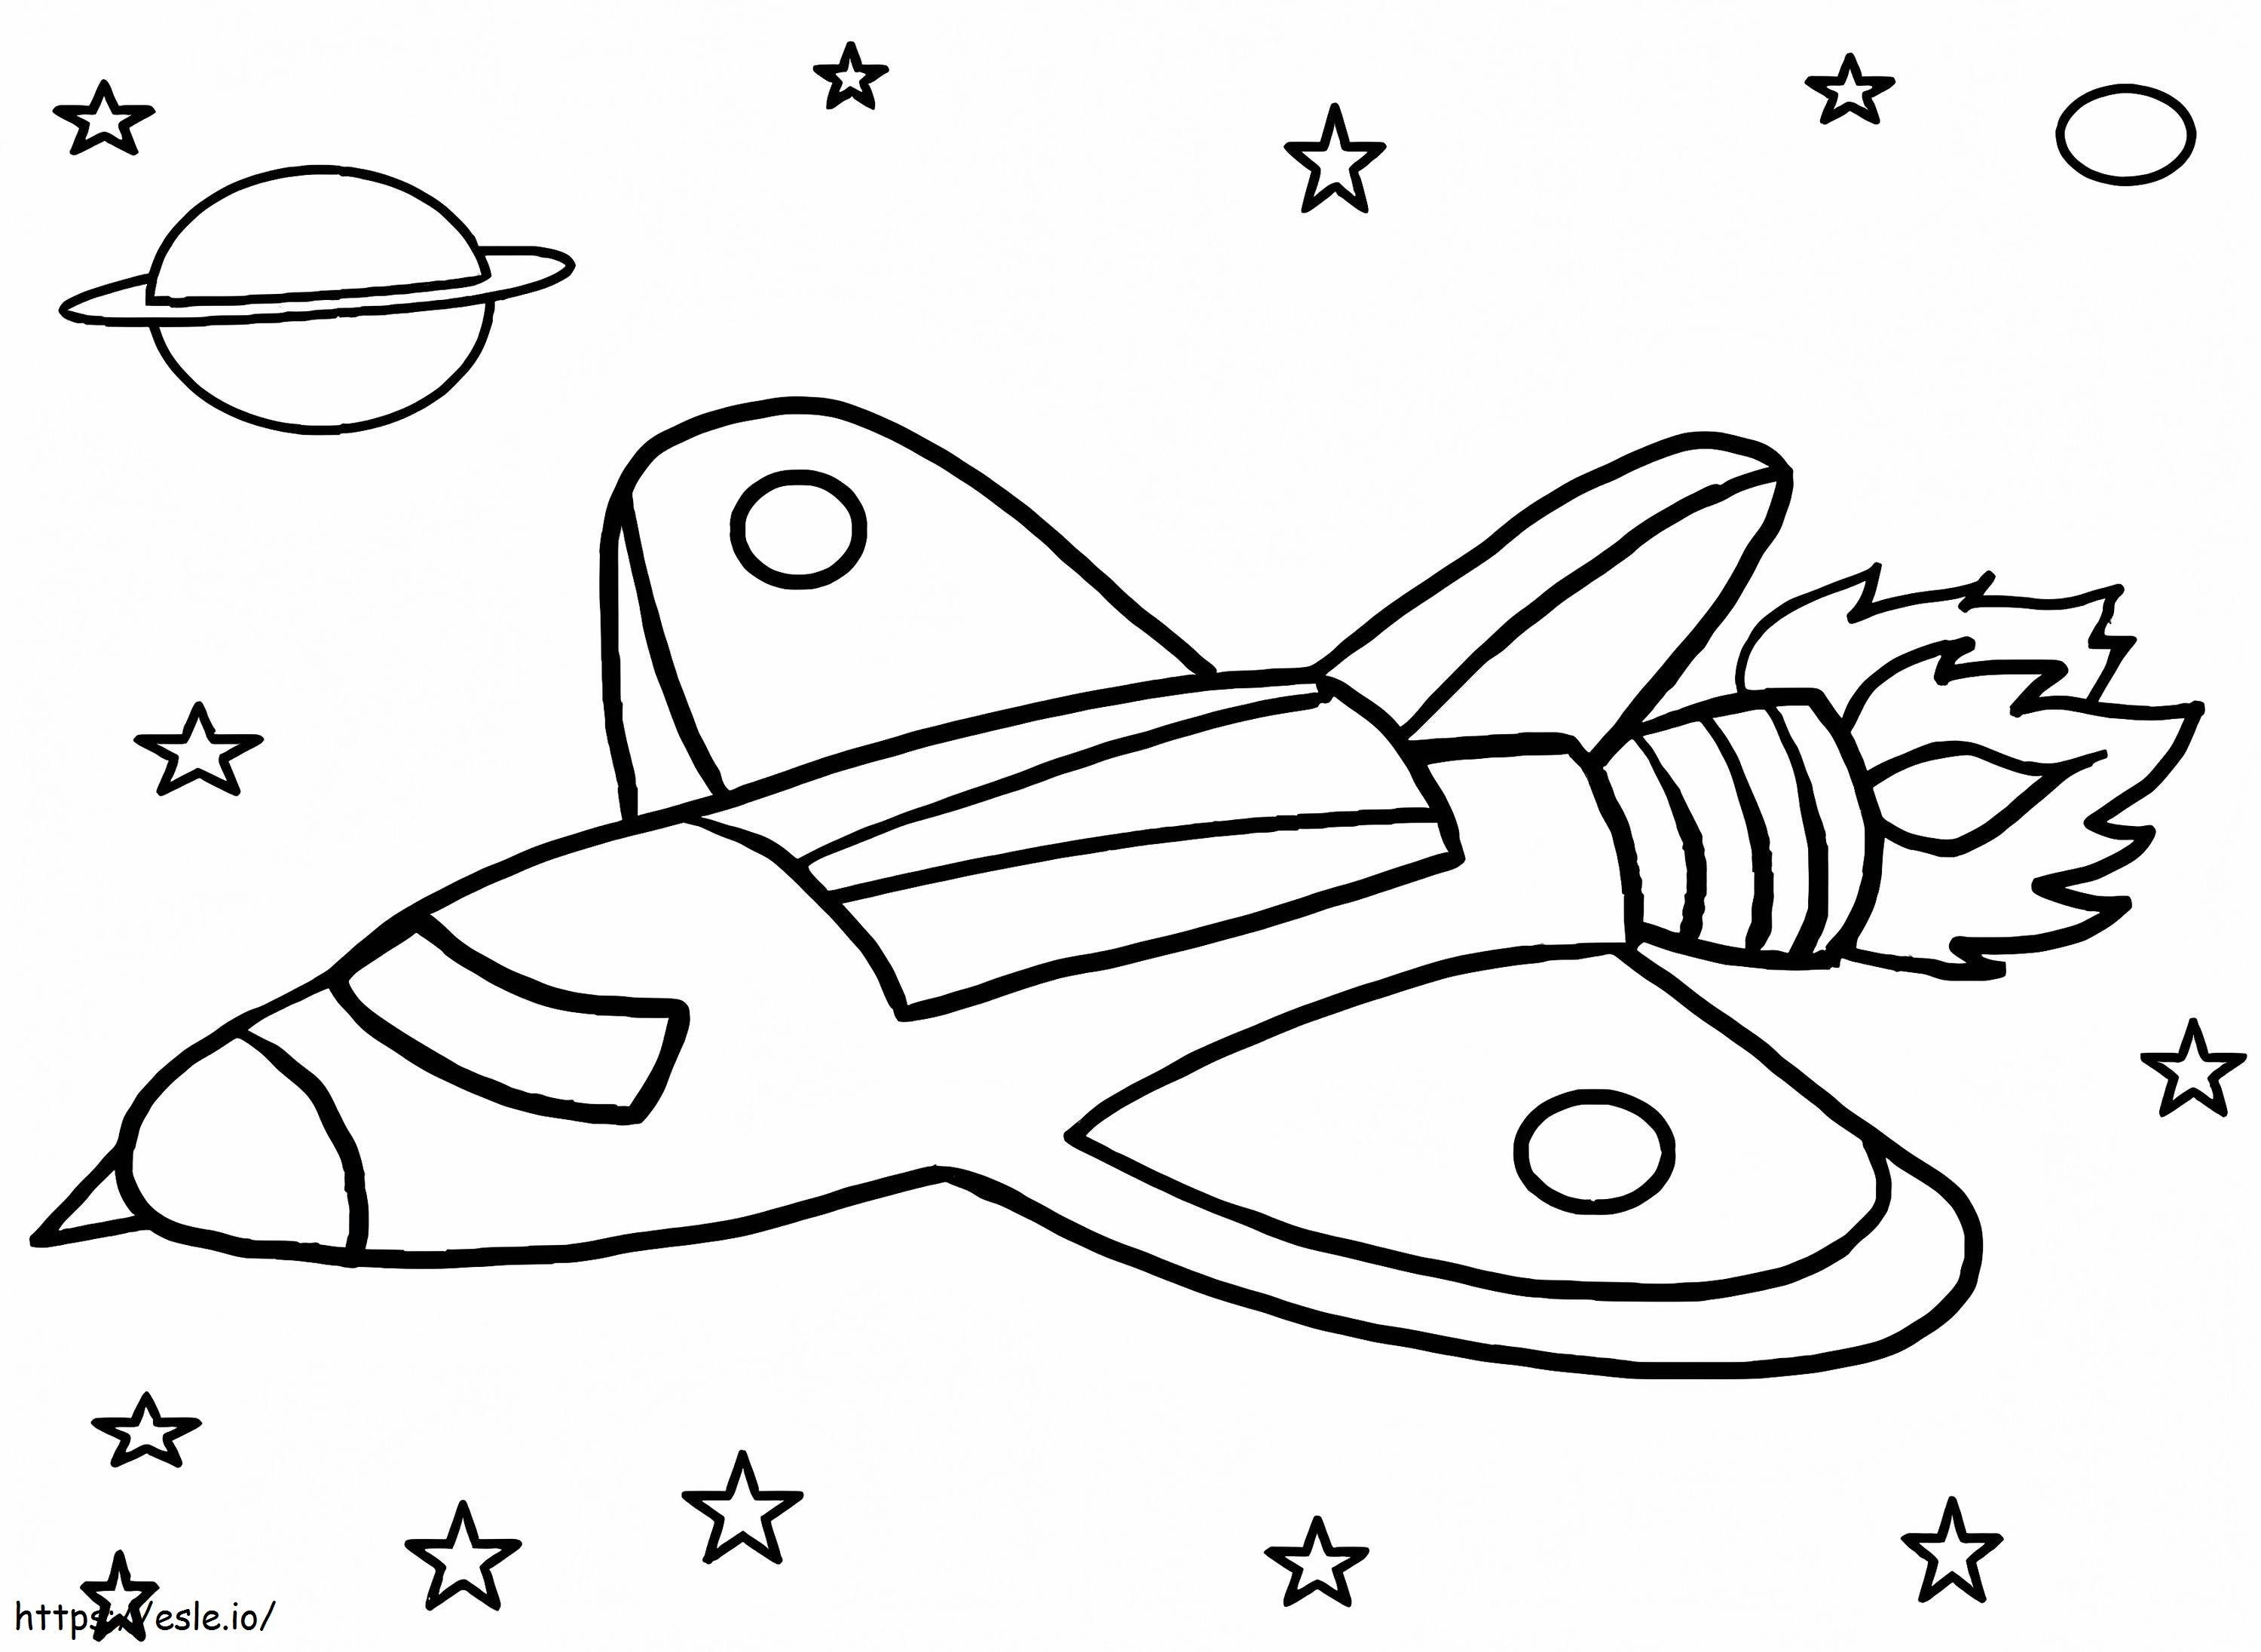 Kids Rocket Ship Coloring Pages coloring page